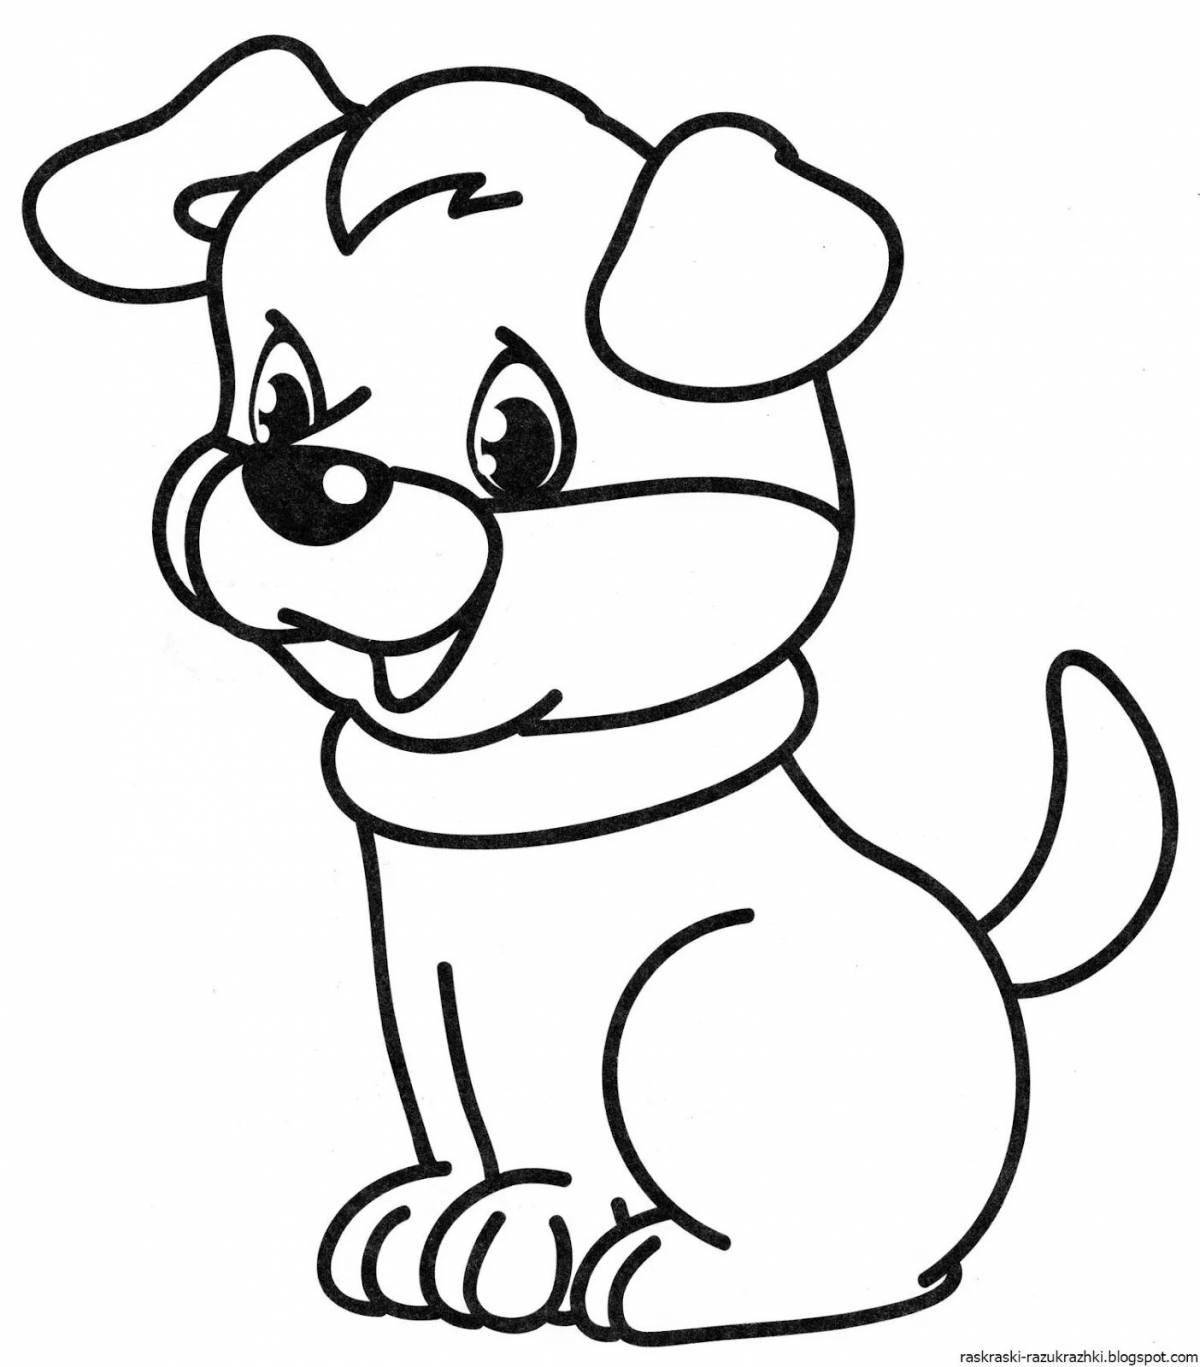 Loving dog coloring book for children 5-6 years old